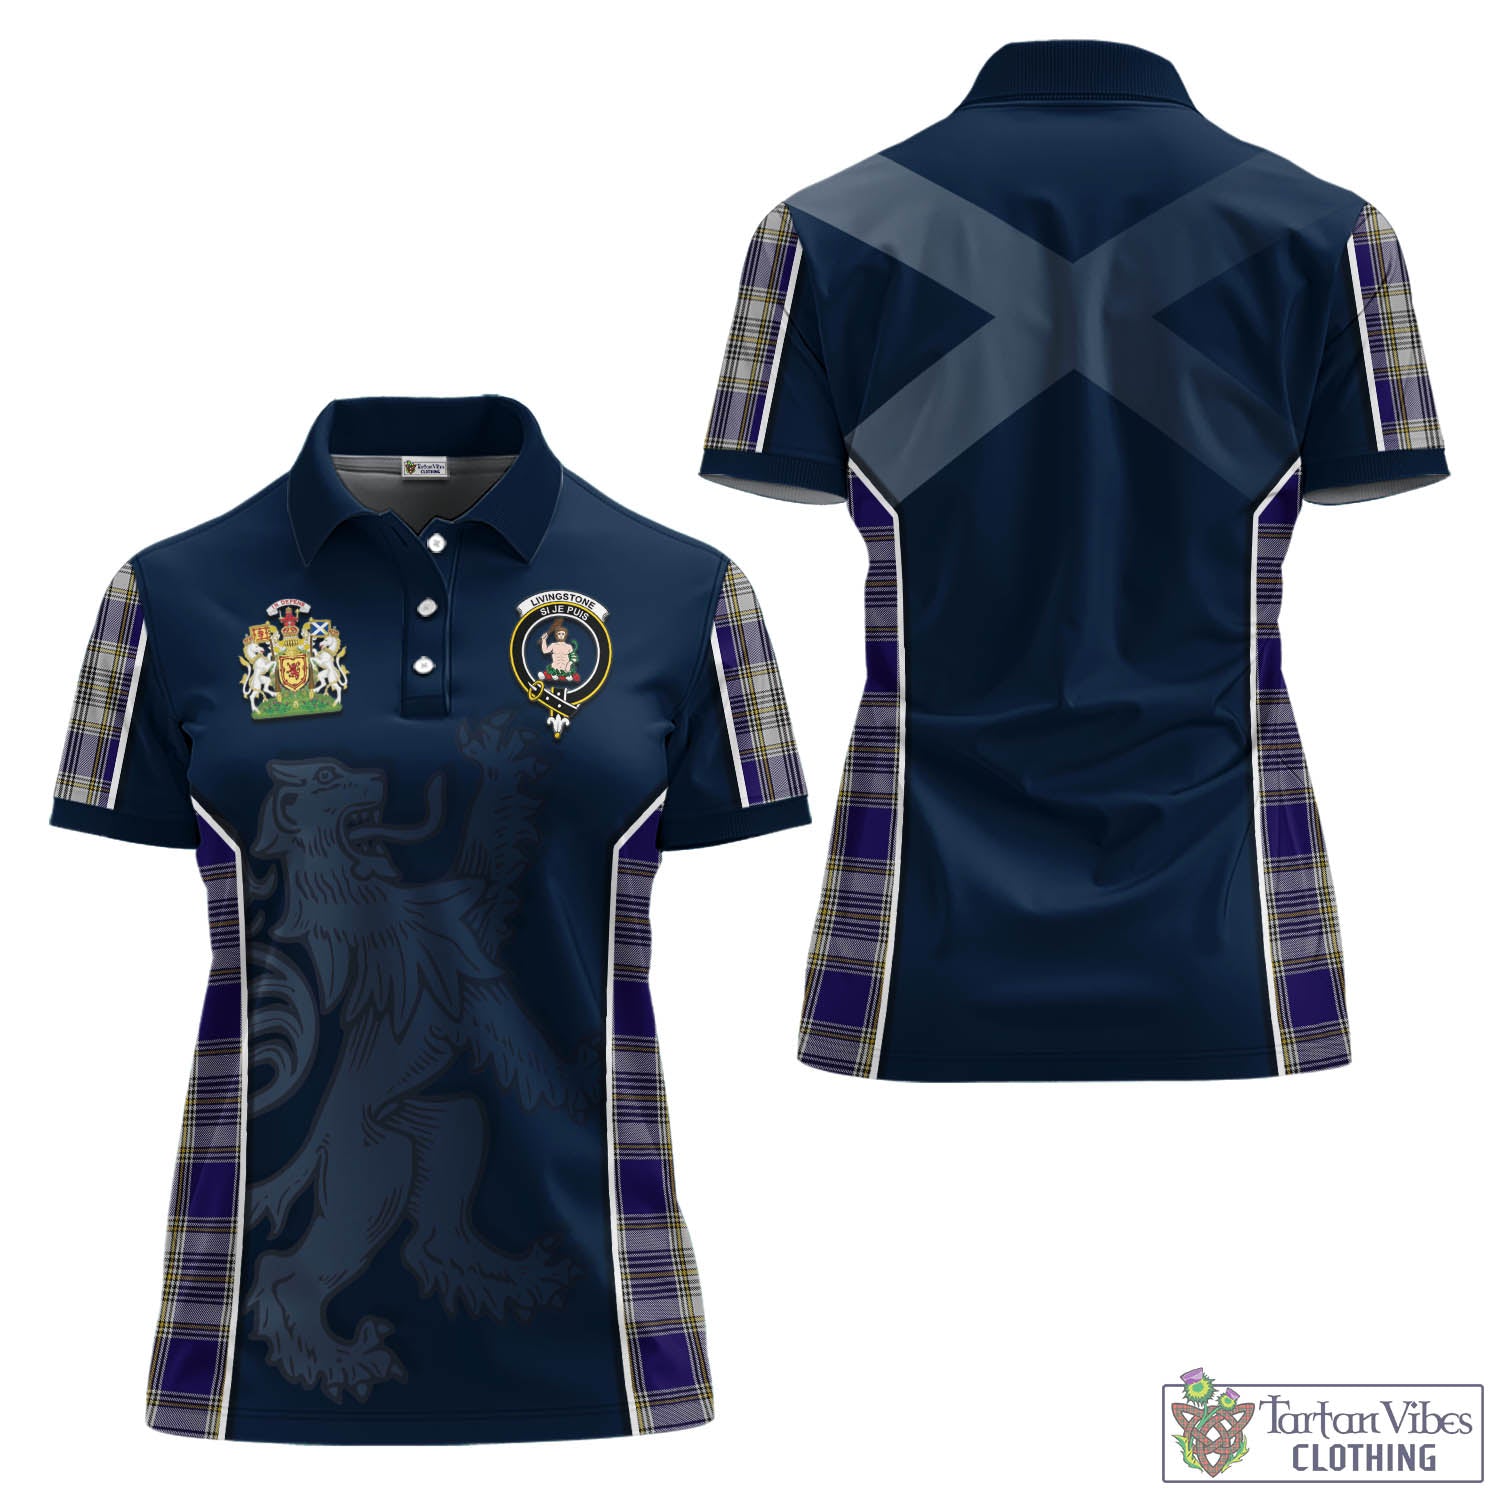 Tartan Vibes Clothing Livingston Dress Tartan Women's Polo Shirt with Family Crest and Lion Rampant Vibes Sport Style